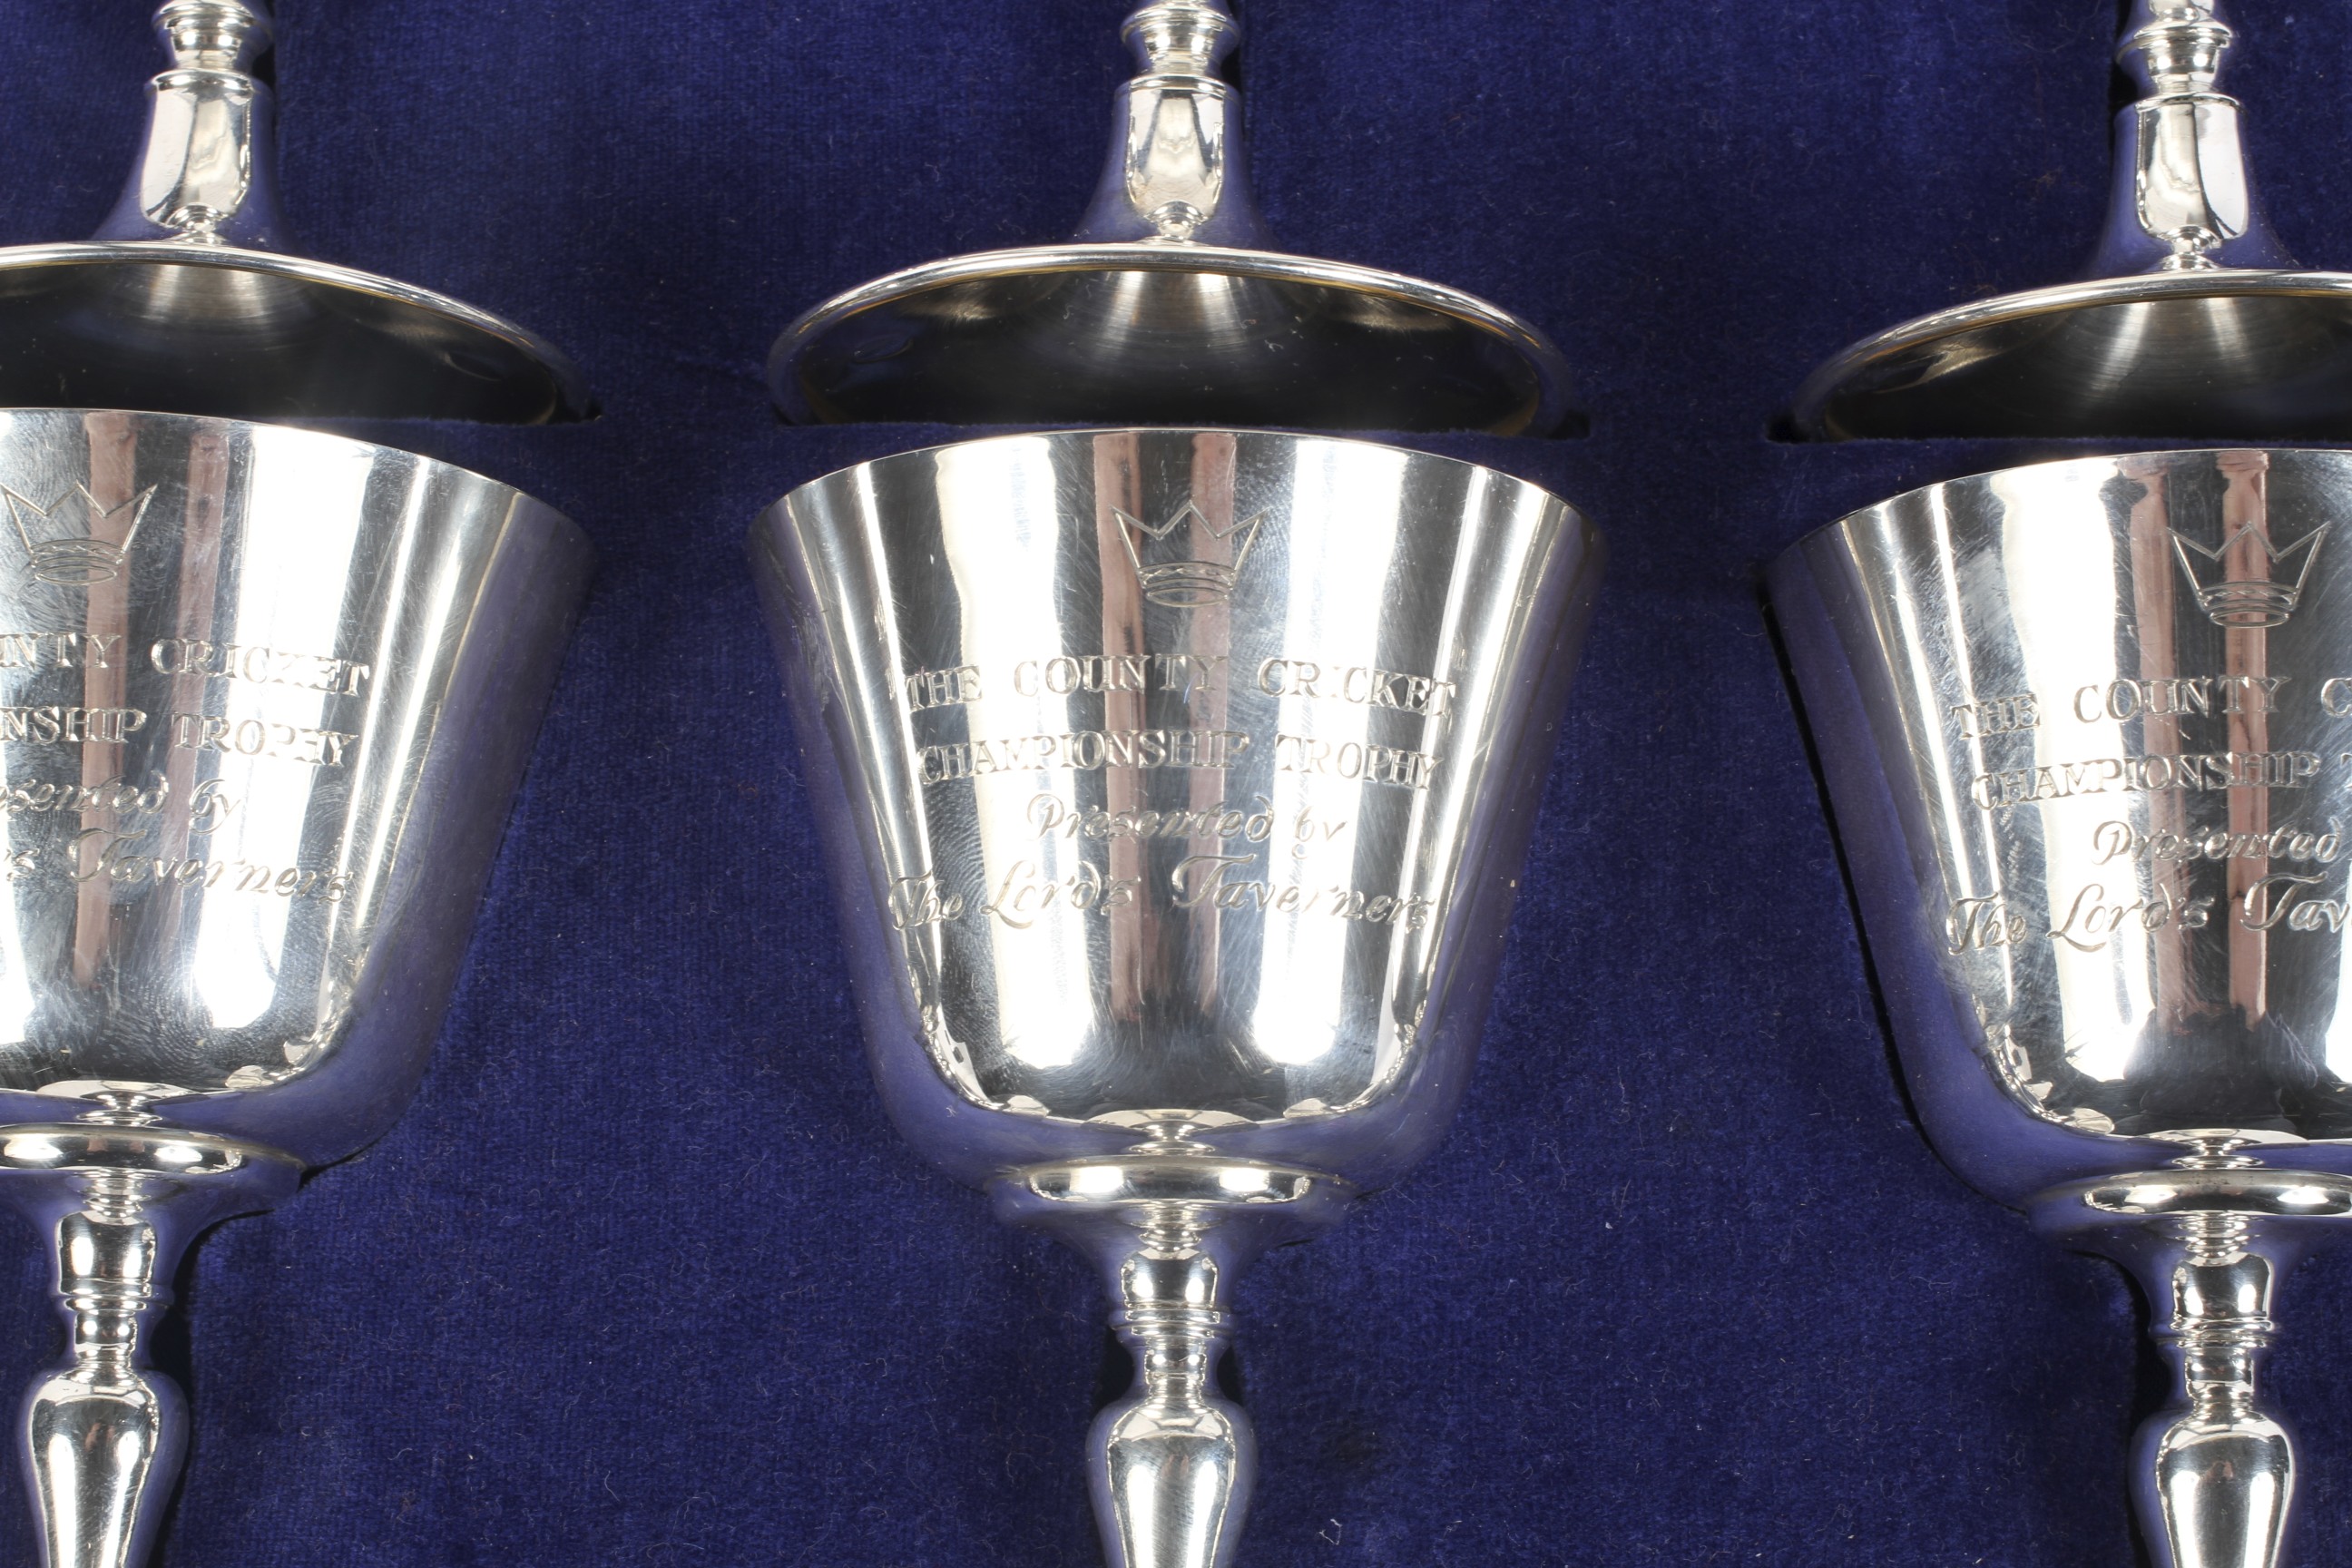 A set of six silver goblets to Commemorate 100 years of English County Cricket. - Image 3 of 4